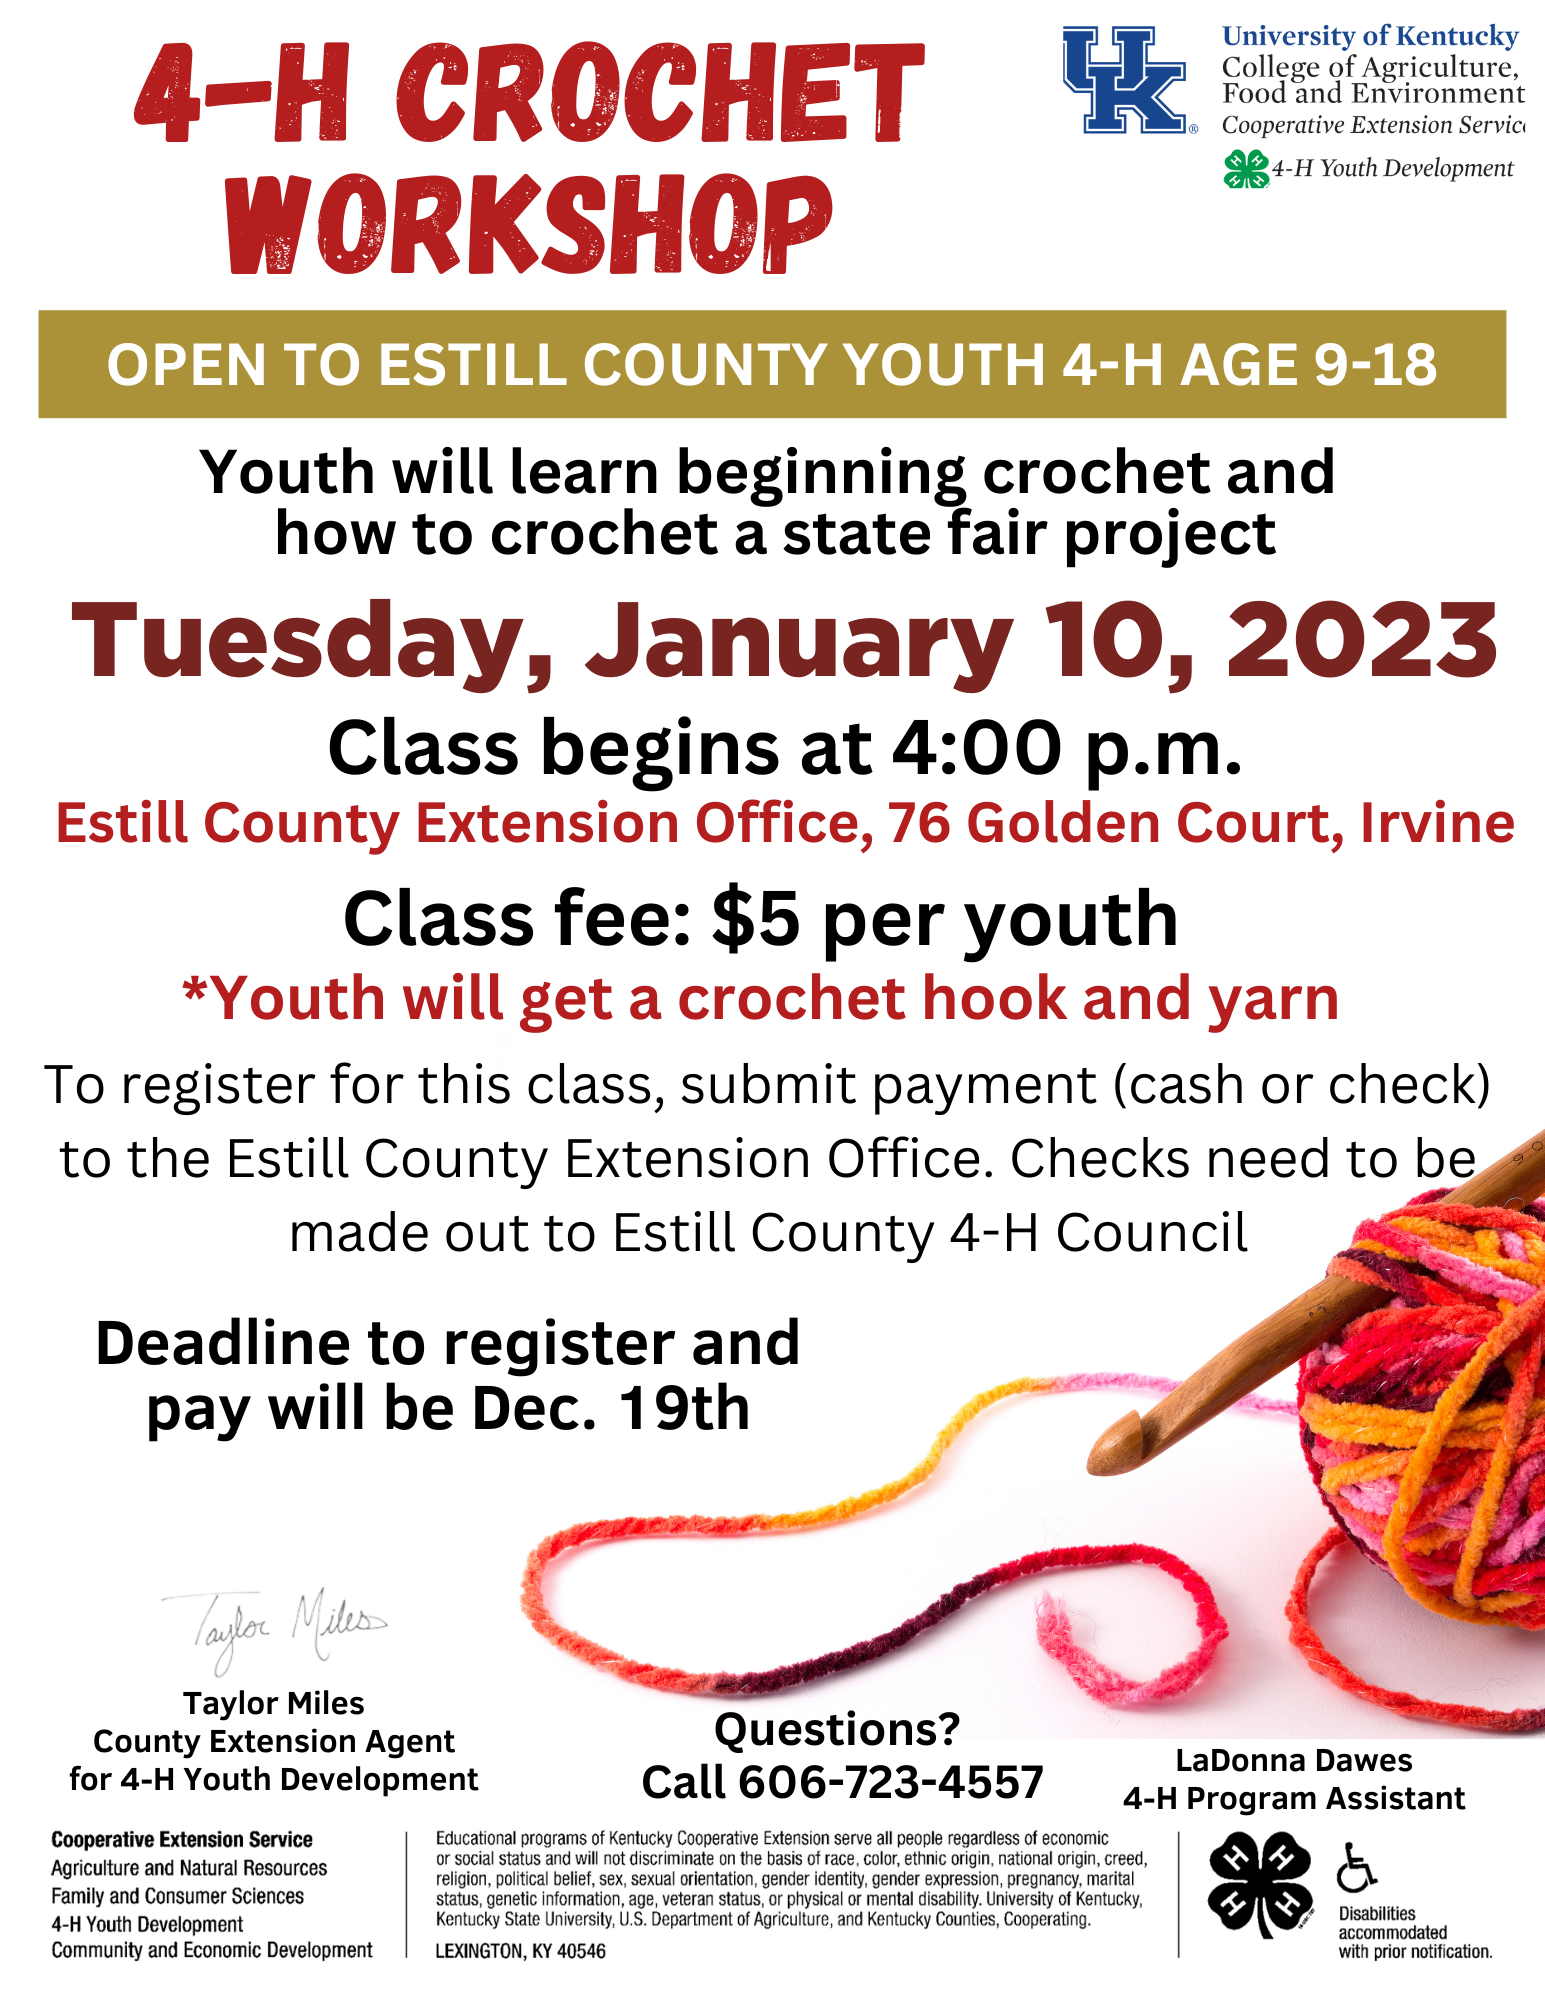 4-H Youth Crochet Workshop, Tuesday, January 10, 2023 